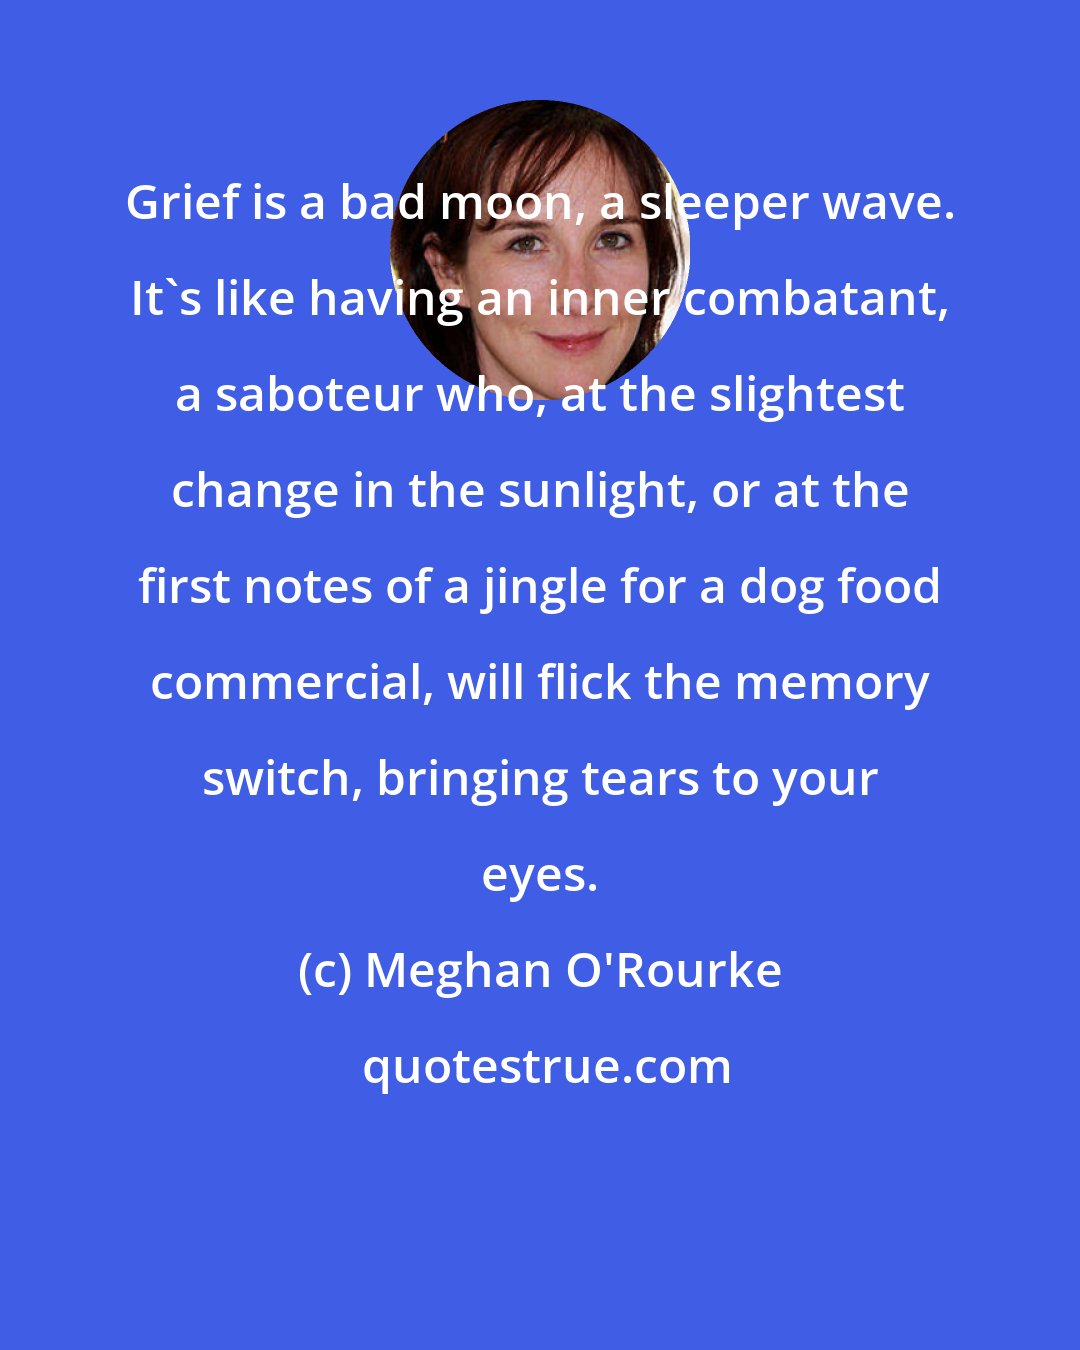 Meghan O'Rourke: Grief is a bad moon, a sleeper wave. It's like having an inner combatant, a saboteur who, at the slightest change in the sunlight, or at the first notes of a jingle for a dog food commercial, will flick the memory switch, bringing tears to your eyes.